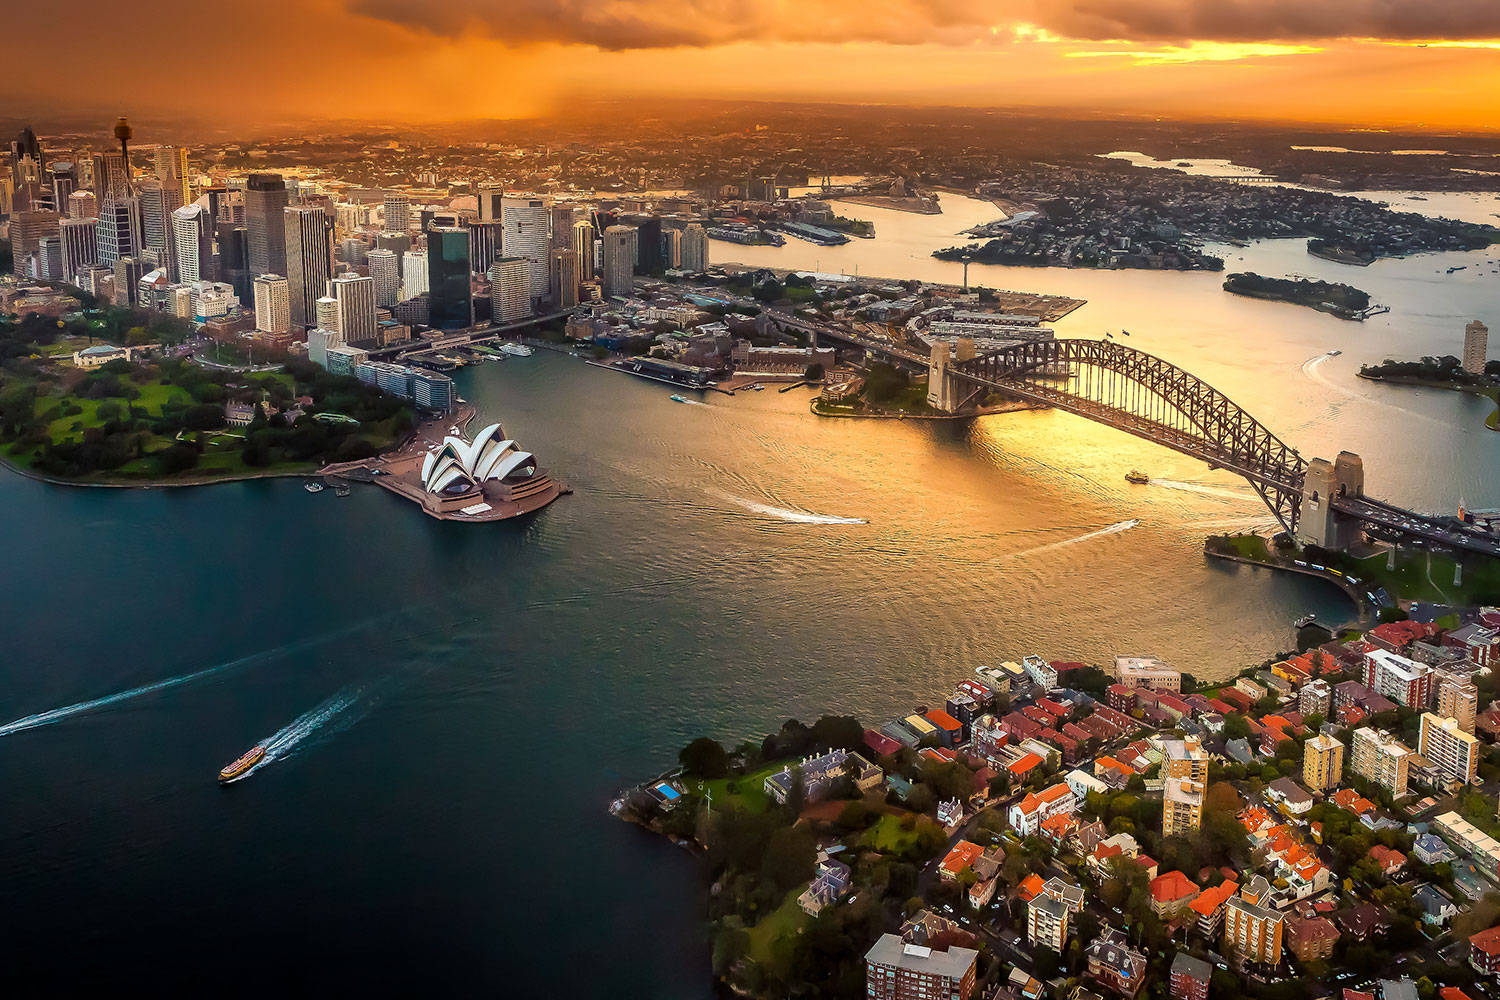 Sydney places third in 2019 World's Most Liveable Cities index